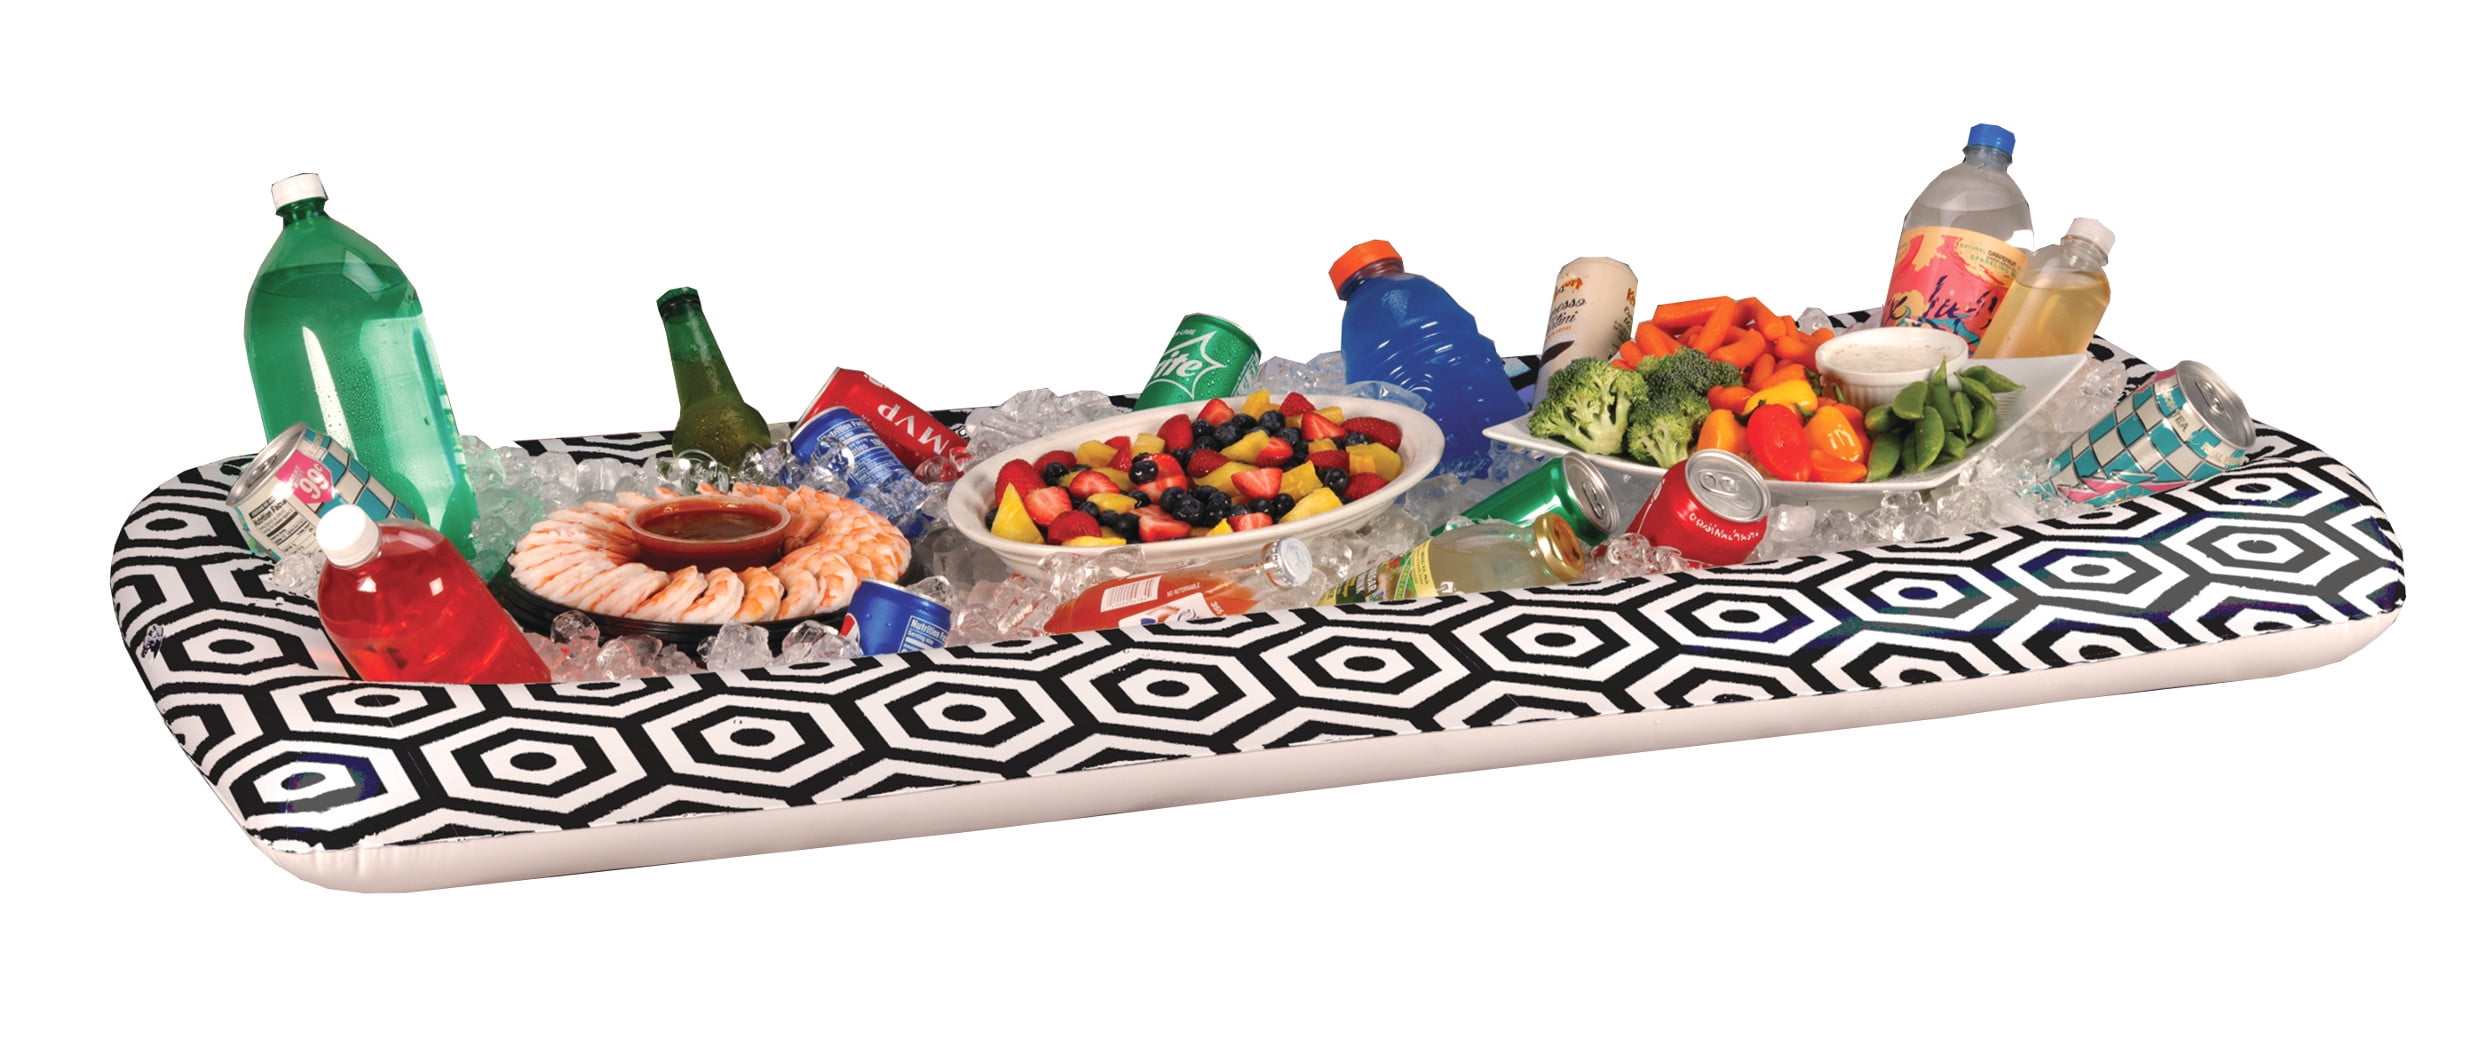 Inflatable Buffet Cooler Tray For Parties Food Drink Ice Cooler 52” x 28” Inch 